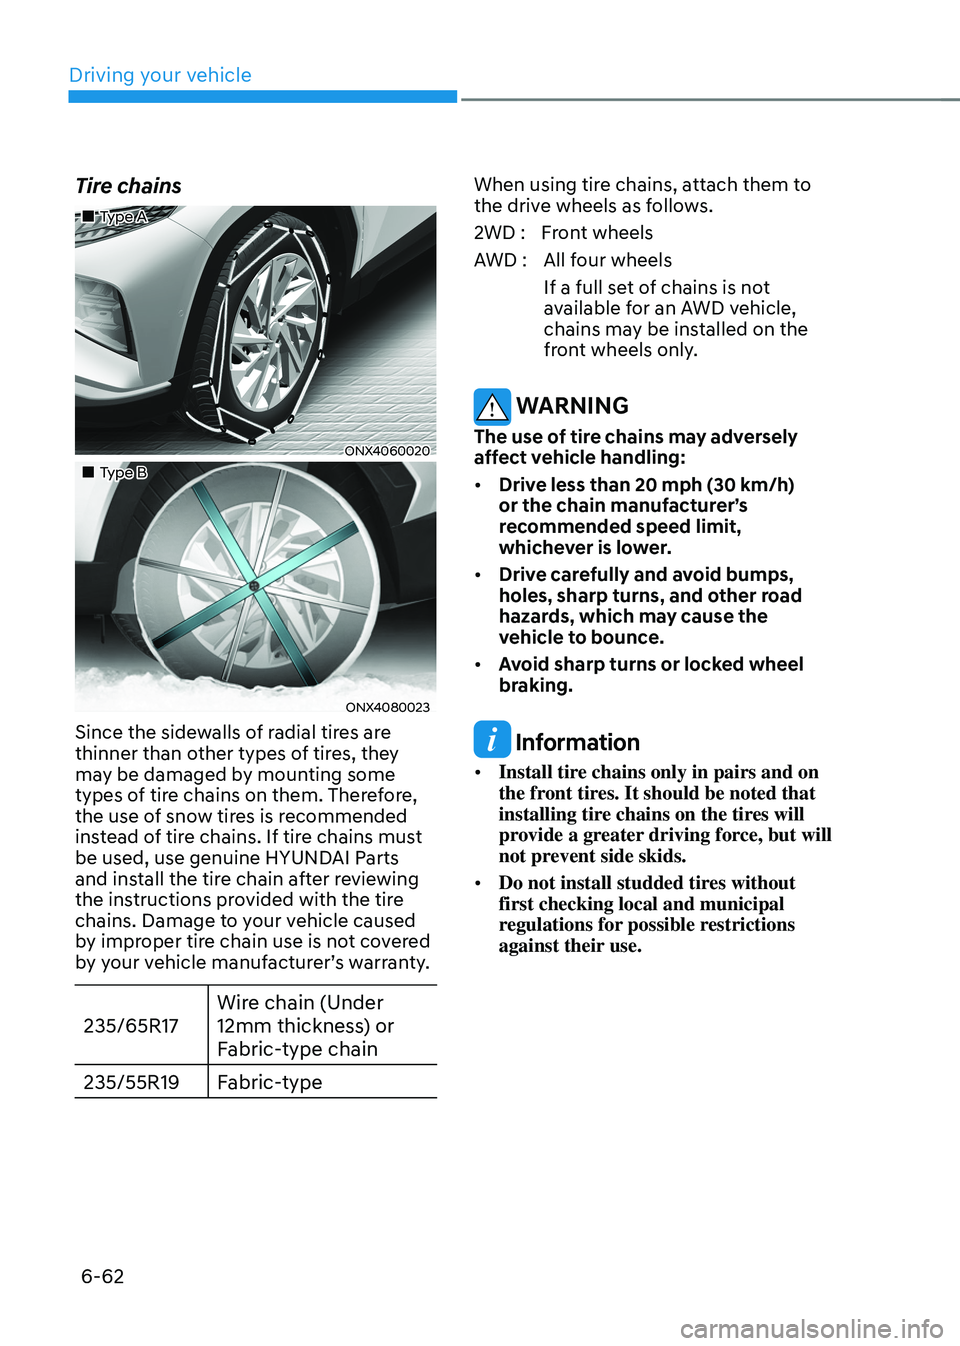 HYUNDAI TUCSON 2022  Owners Manual Driving your vehicle
6-62
Tire chains
„„Type A
ONX4060020
„„Type B
ONX4080023 
Since the sidewalls of radial tires are 
thinner than other types of tires, they 
may be damaged by m